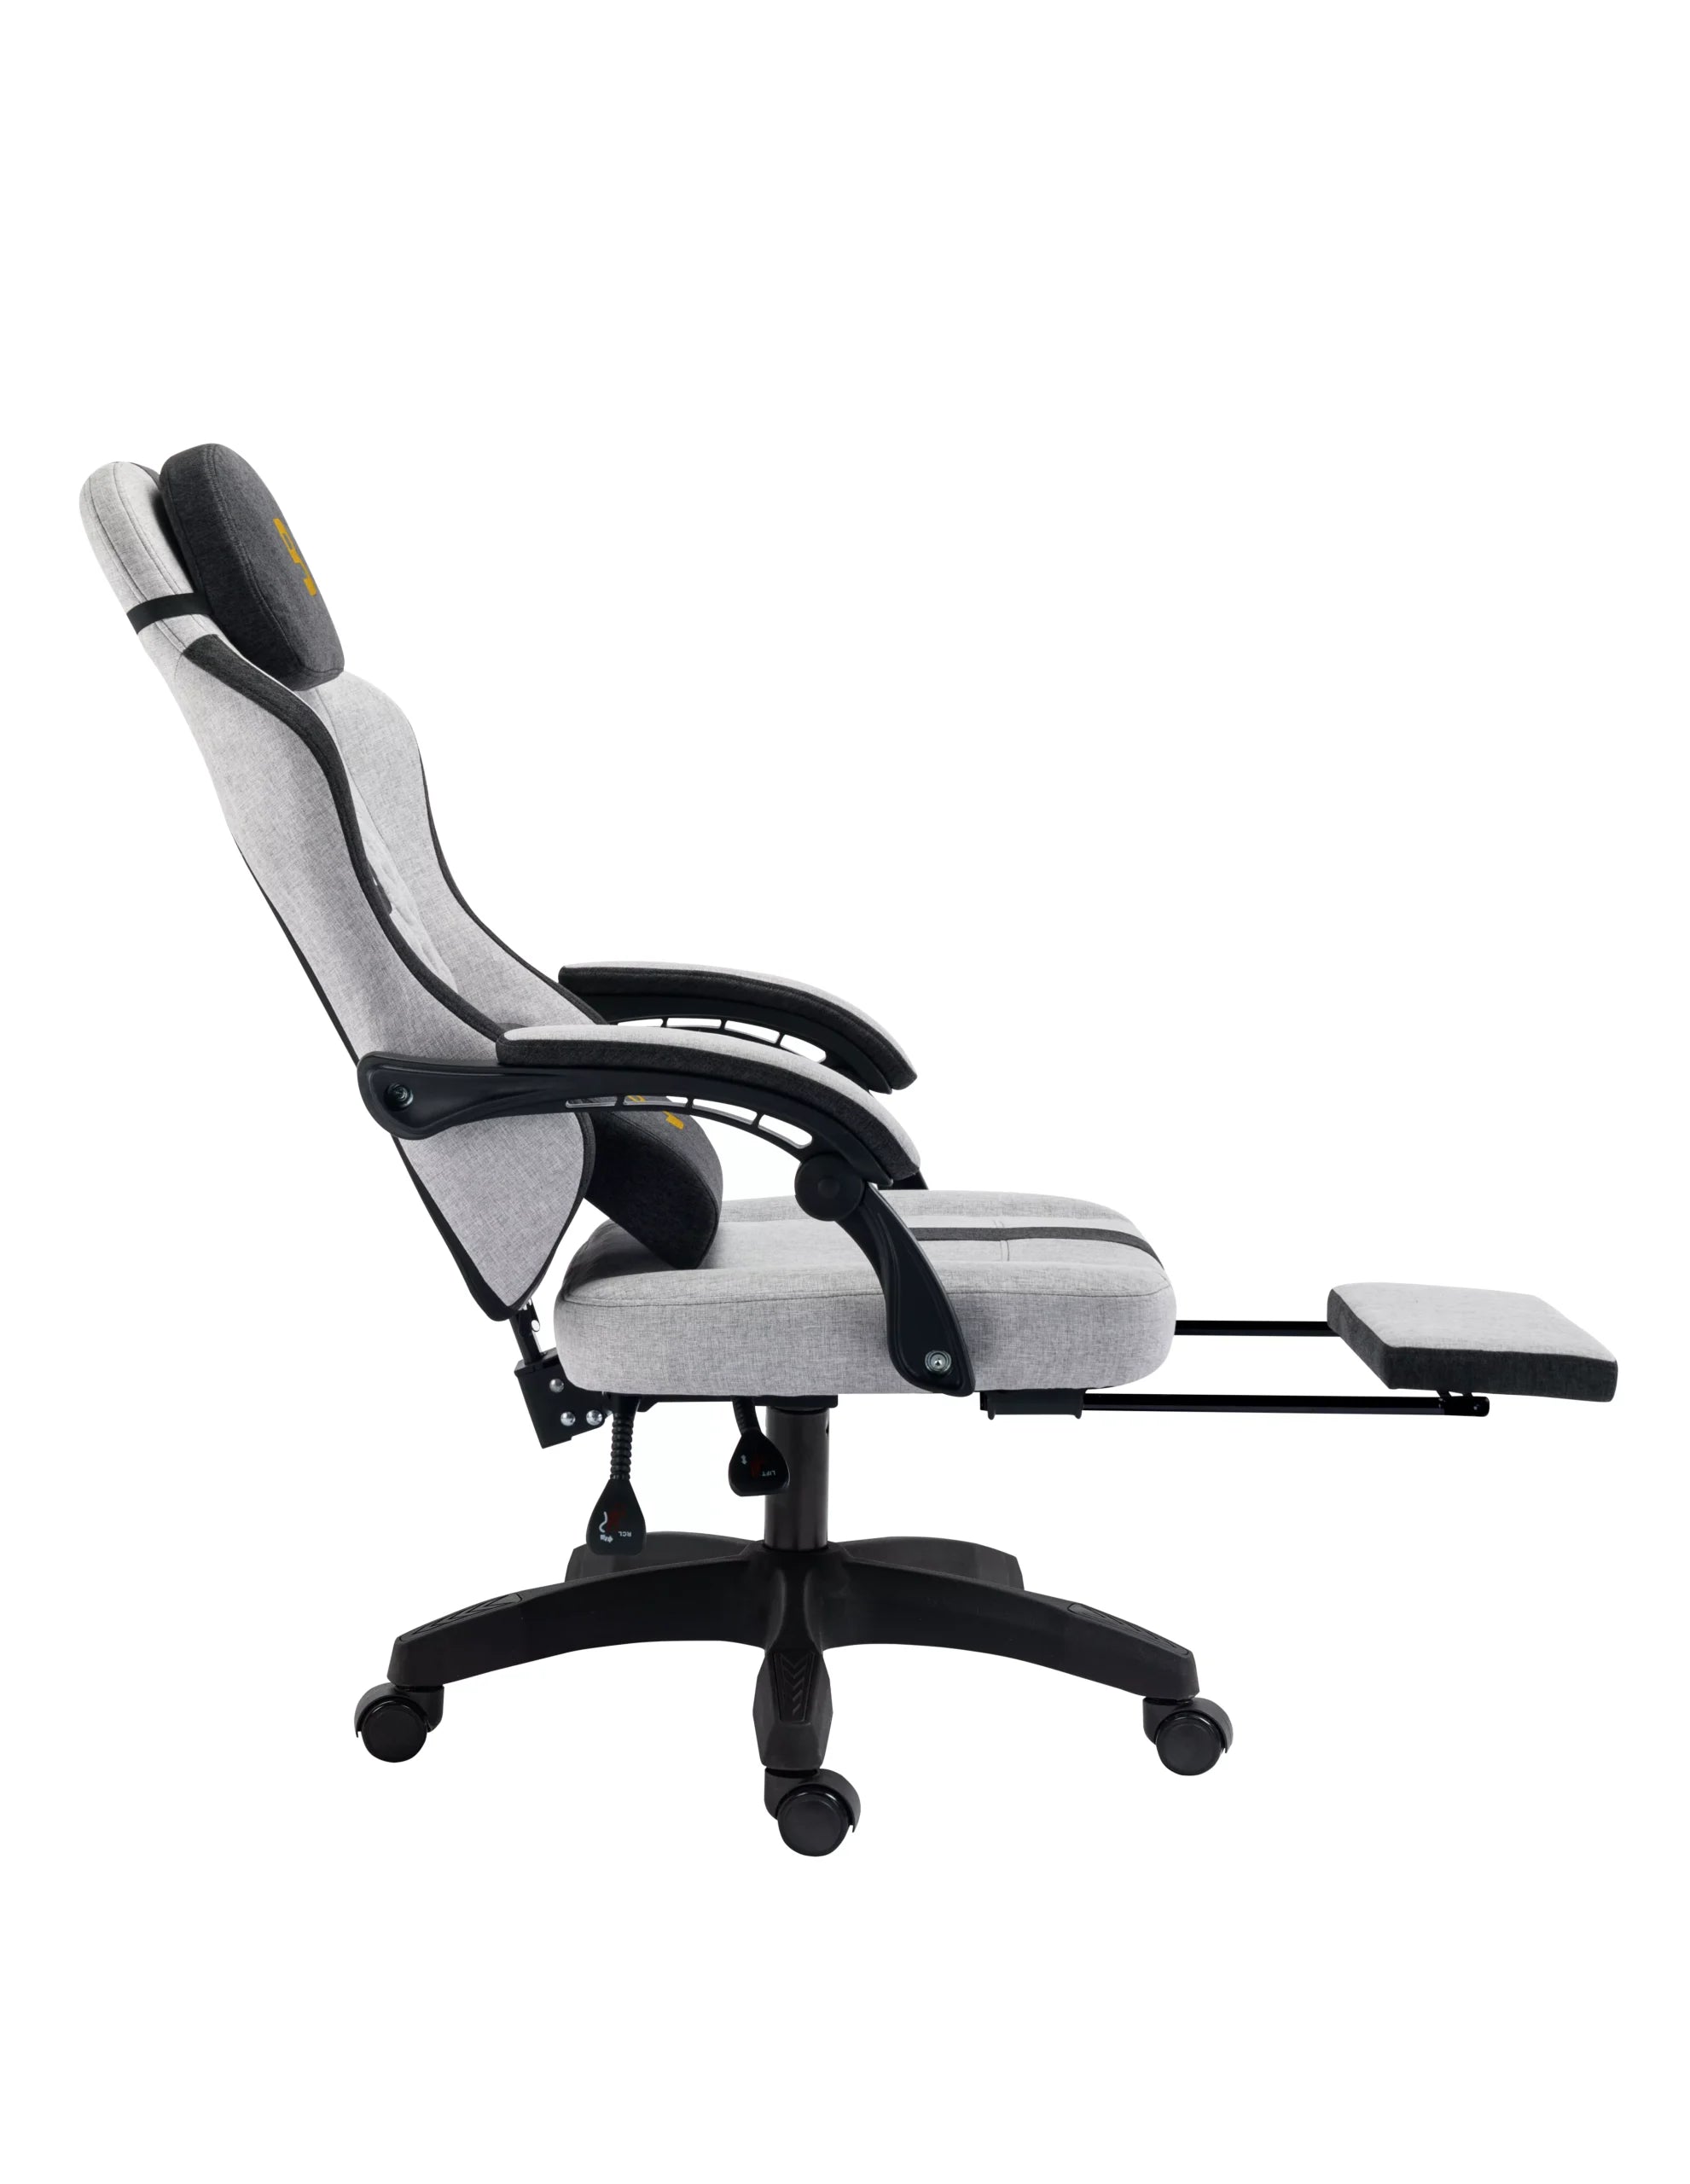 Boost Surge Pro Ergonomic Chair With Footrest-9